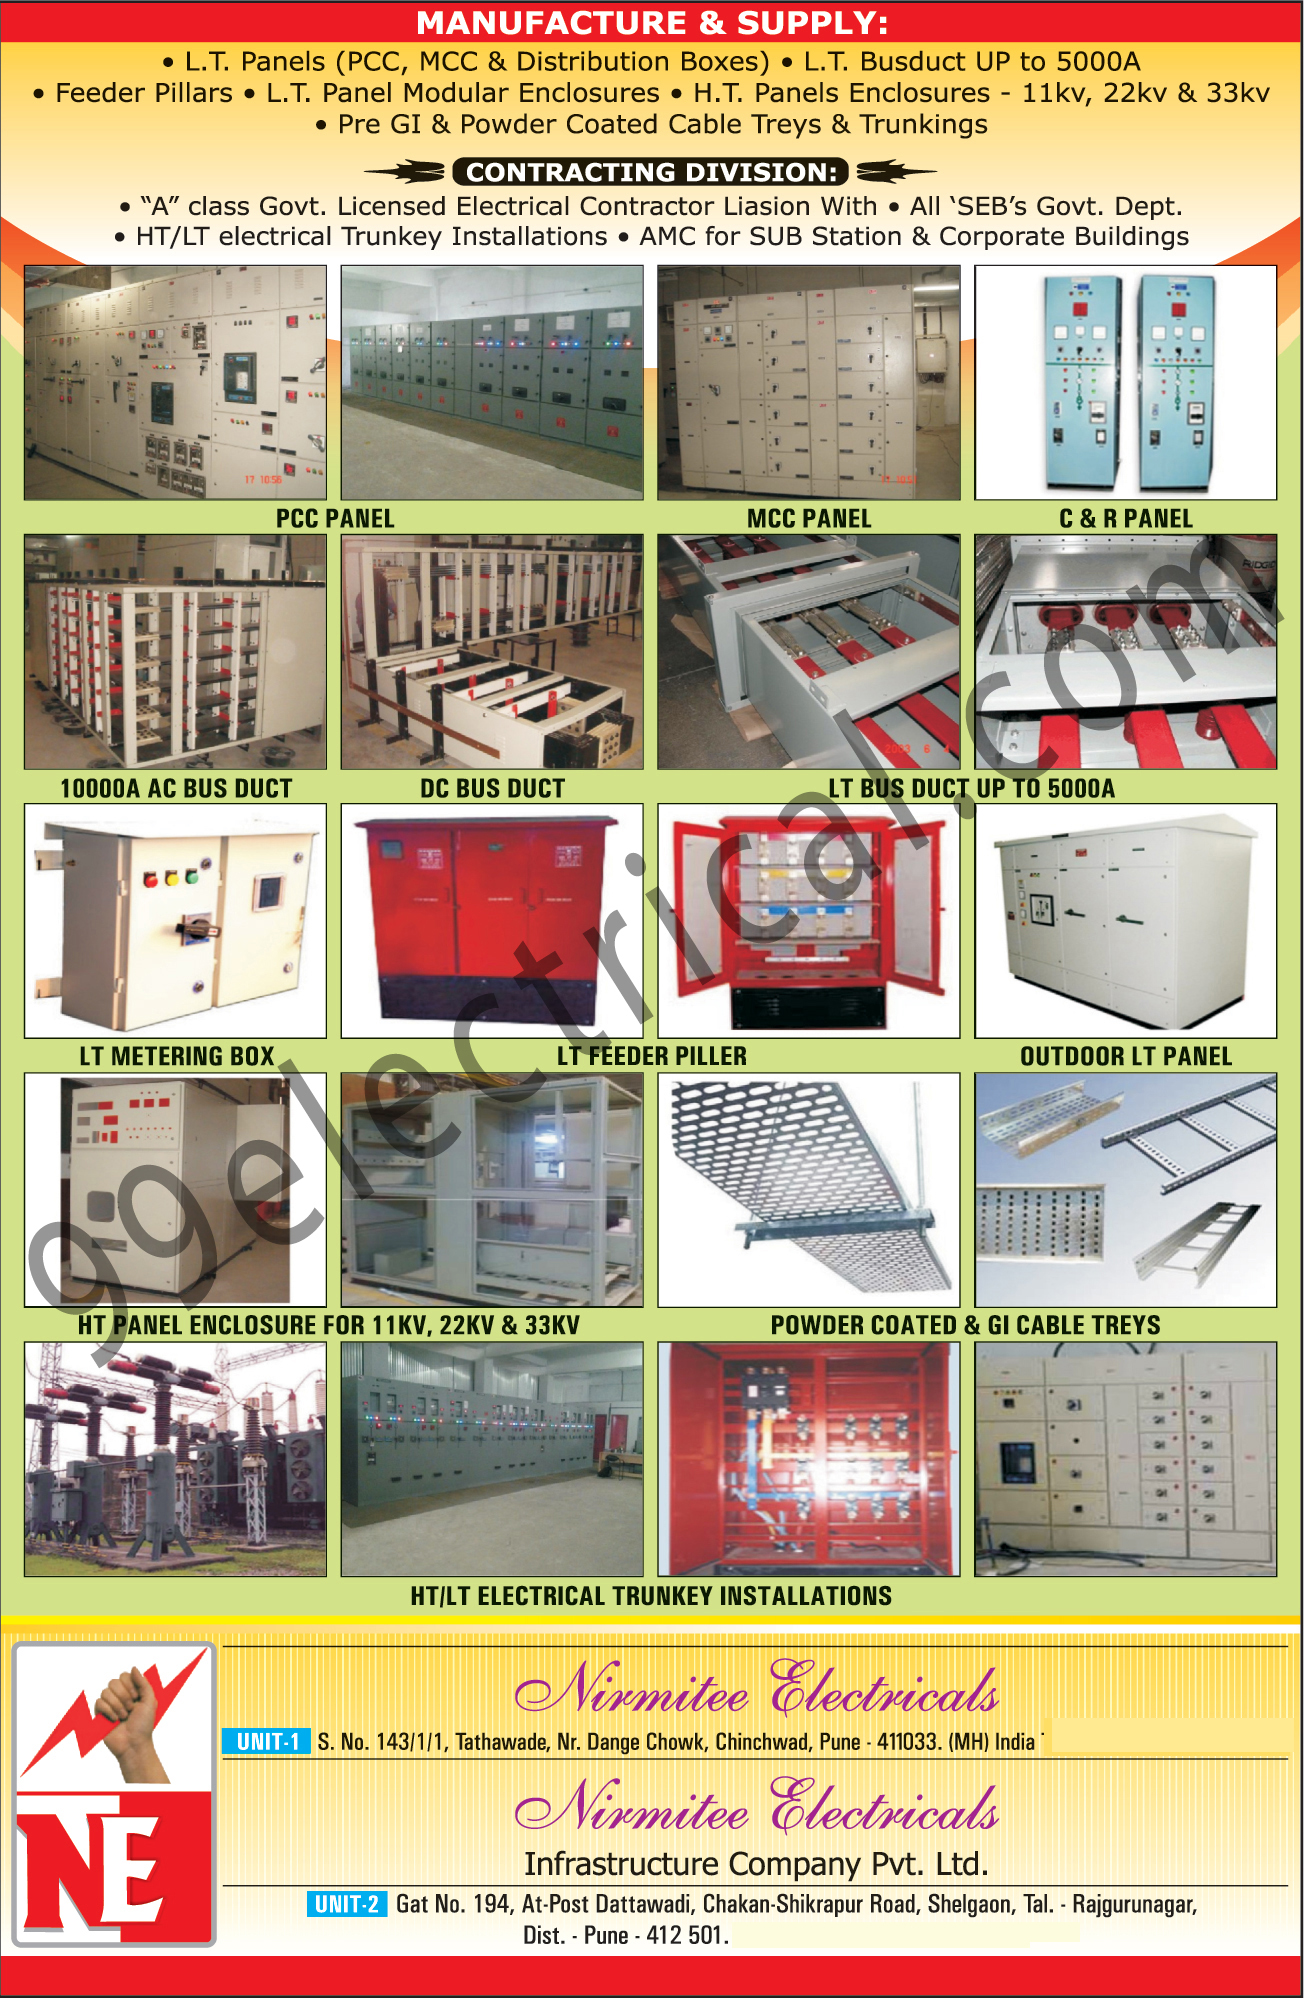 PCC Panels, MCC Panels, CR Panels, AC Bus Duct, DC Bus Duct, LT Bus Duct, LT Metering Duct, LT Feeder Piller, Outdoor Lt Panels, HT Panel Enclosure, Powder Coated, GI Cable Treys, Electrical Trunkey Installations, LT Panels, Panel Modular Enclousers,Electrical Products, Busduct, Distribution Boxes, Endosure, Electrical Panels, Powder Coated Trays, GI Cable Trays, HT Electrical Trunkey Insulations, LT Electrical Trunkey Insulations